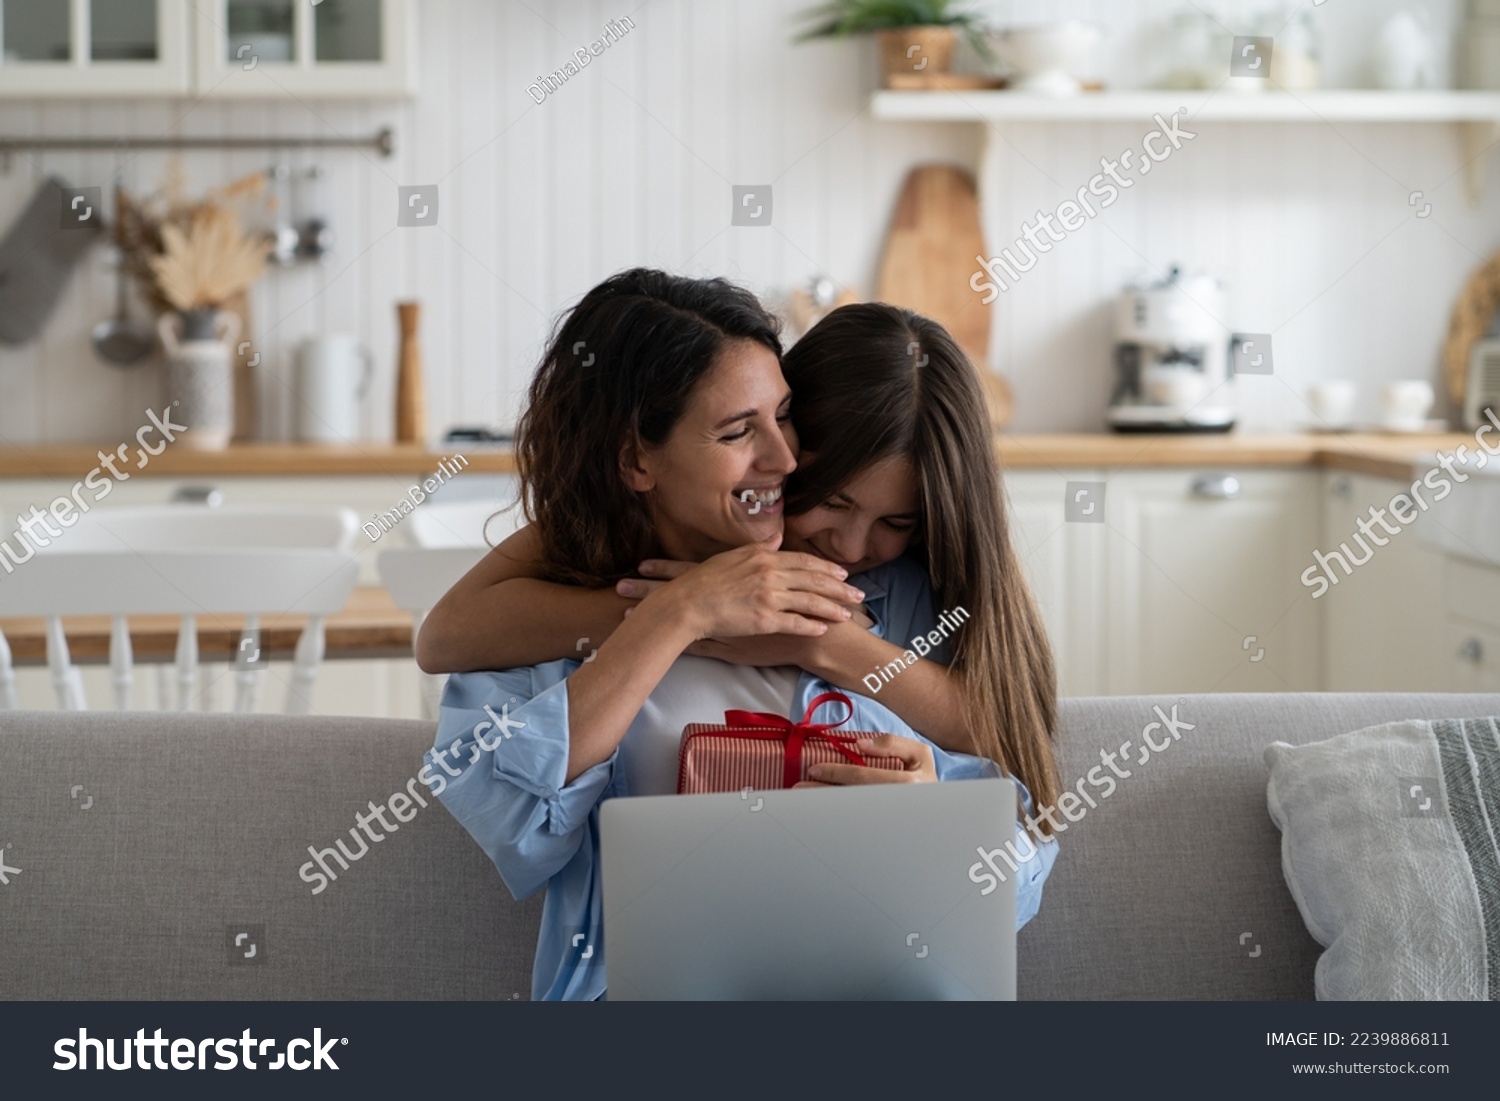 Little girl daughter hugging embracing happy beloved mother with love and tenderness while celebrating special occasion together at home, child wishing happy birthday to mom, greeting with Mothers Day #2239886811